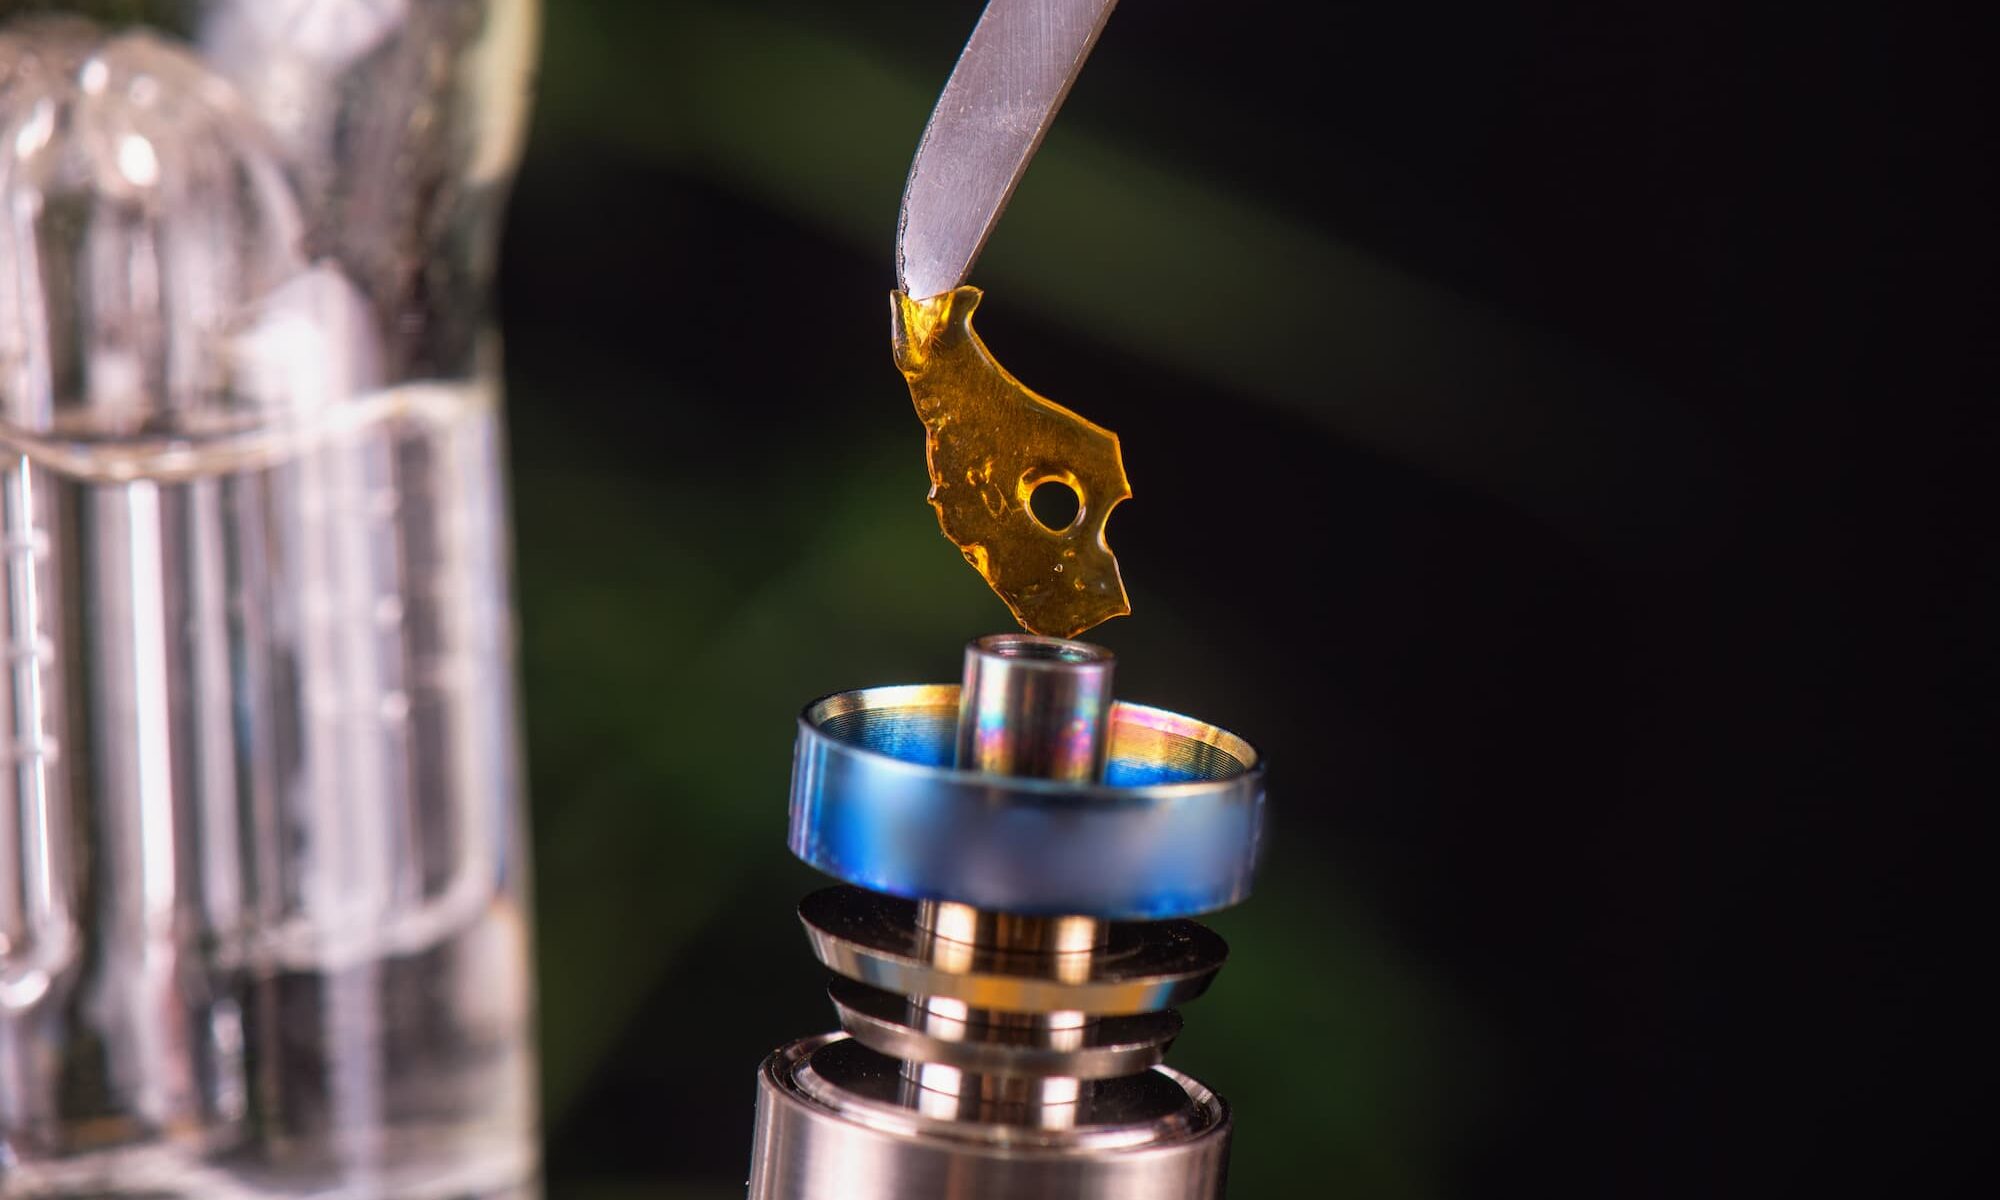 close up image of resin being heated up to use as a dab